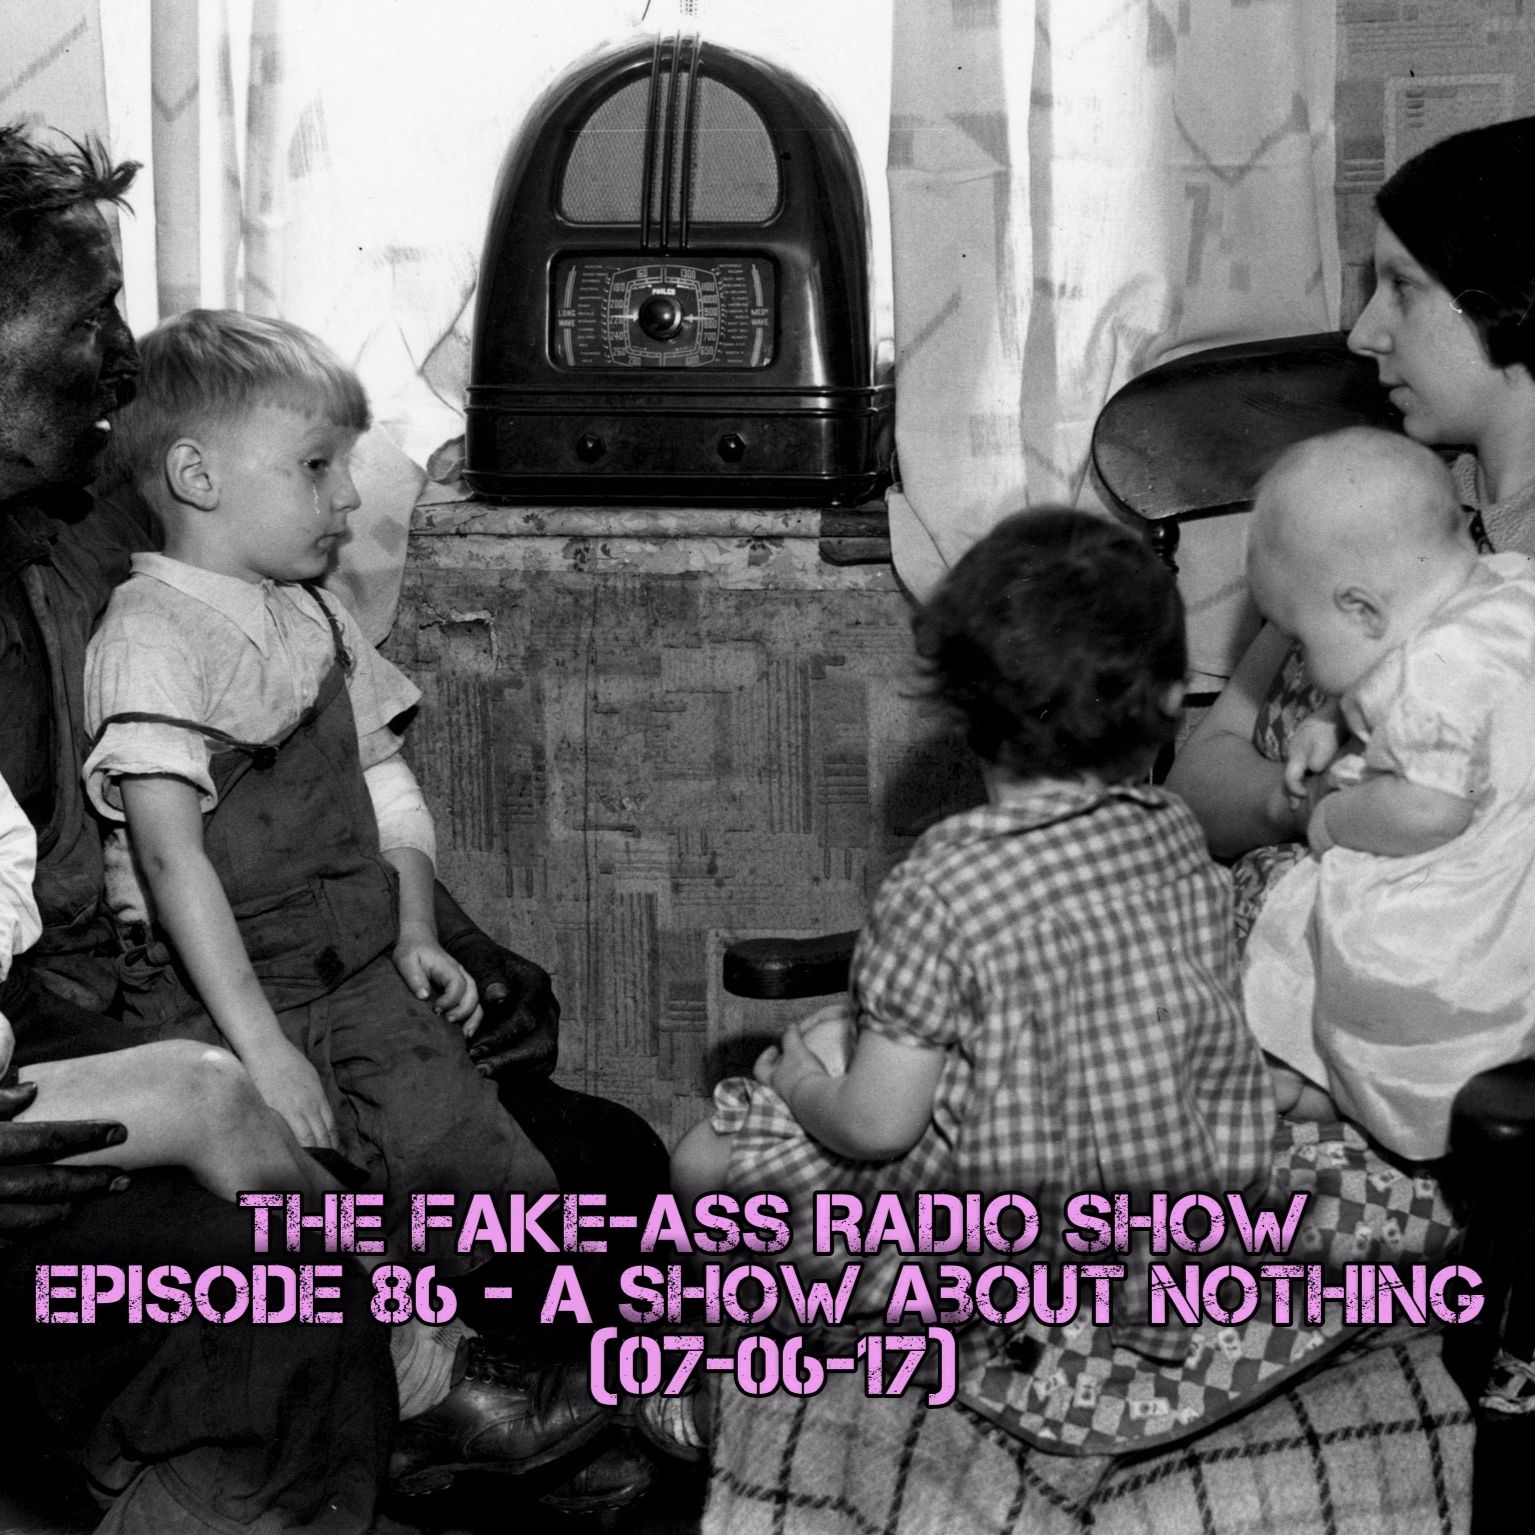 Episode 86 - A Show About Nothing (07-07-17)